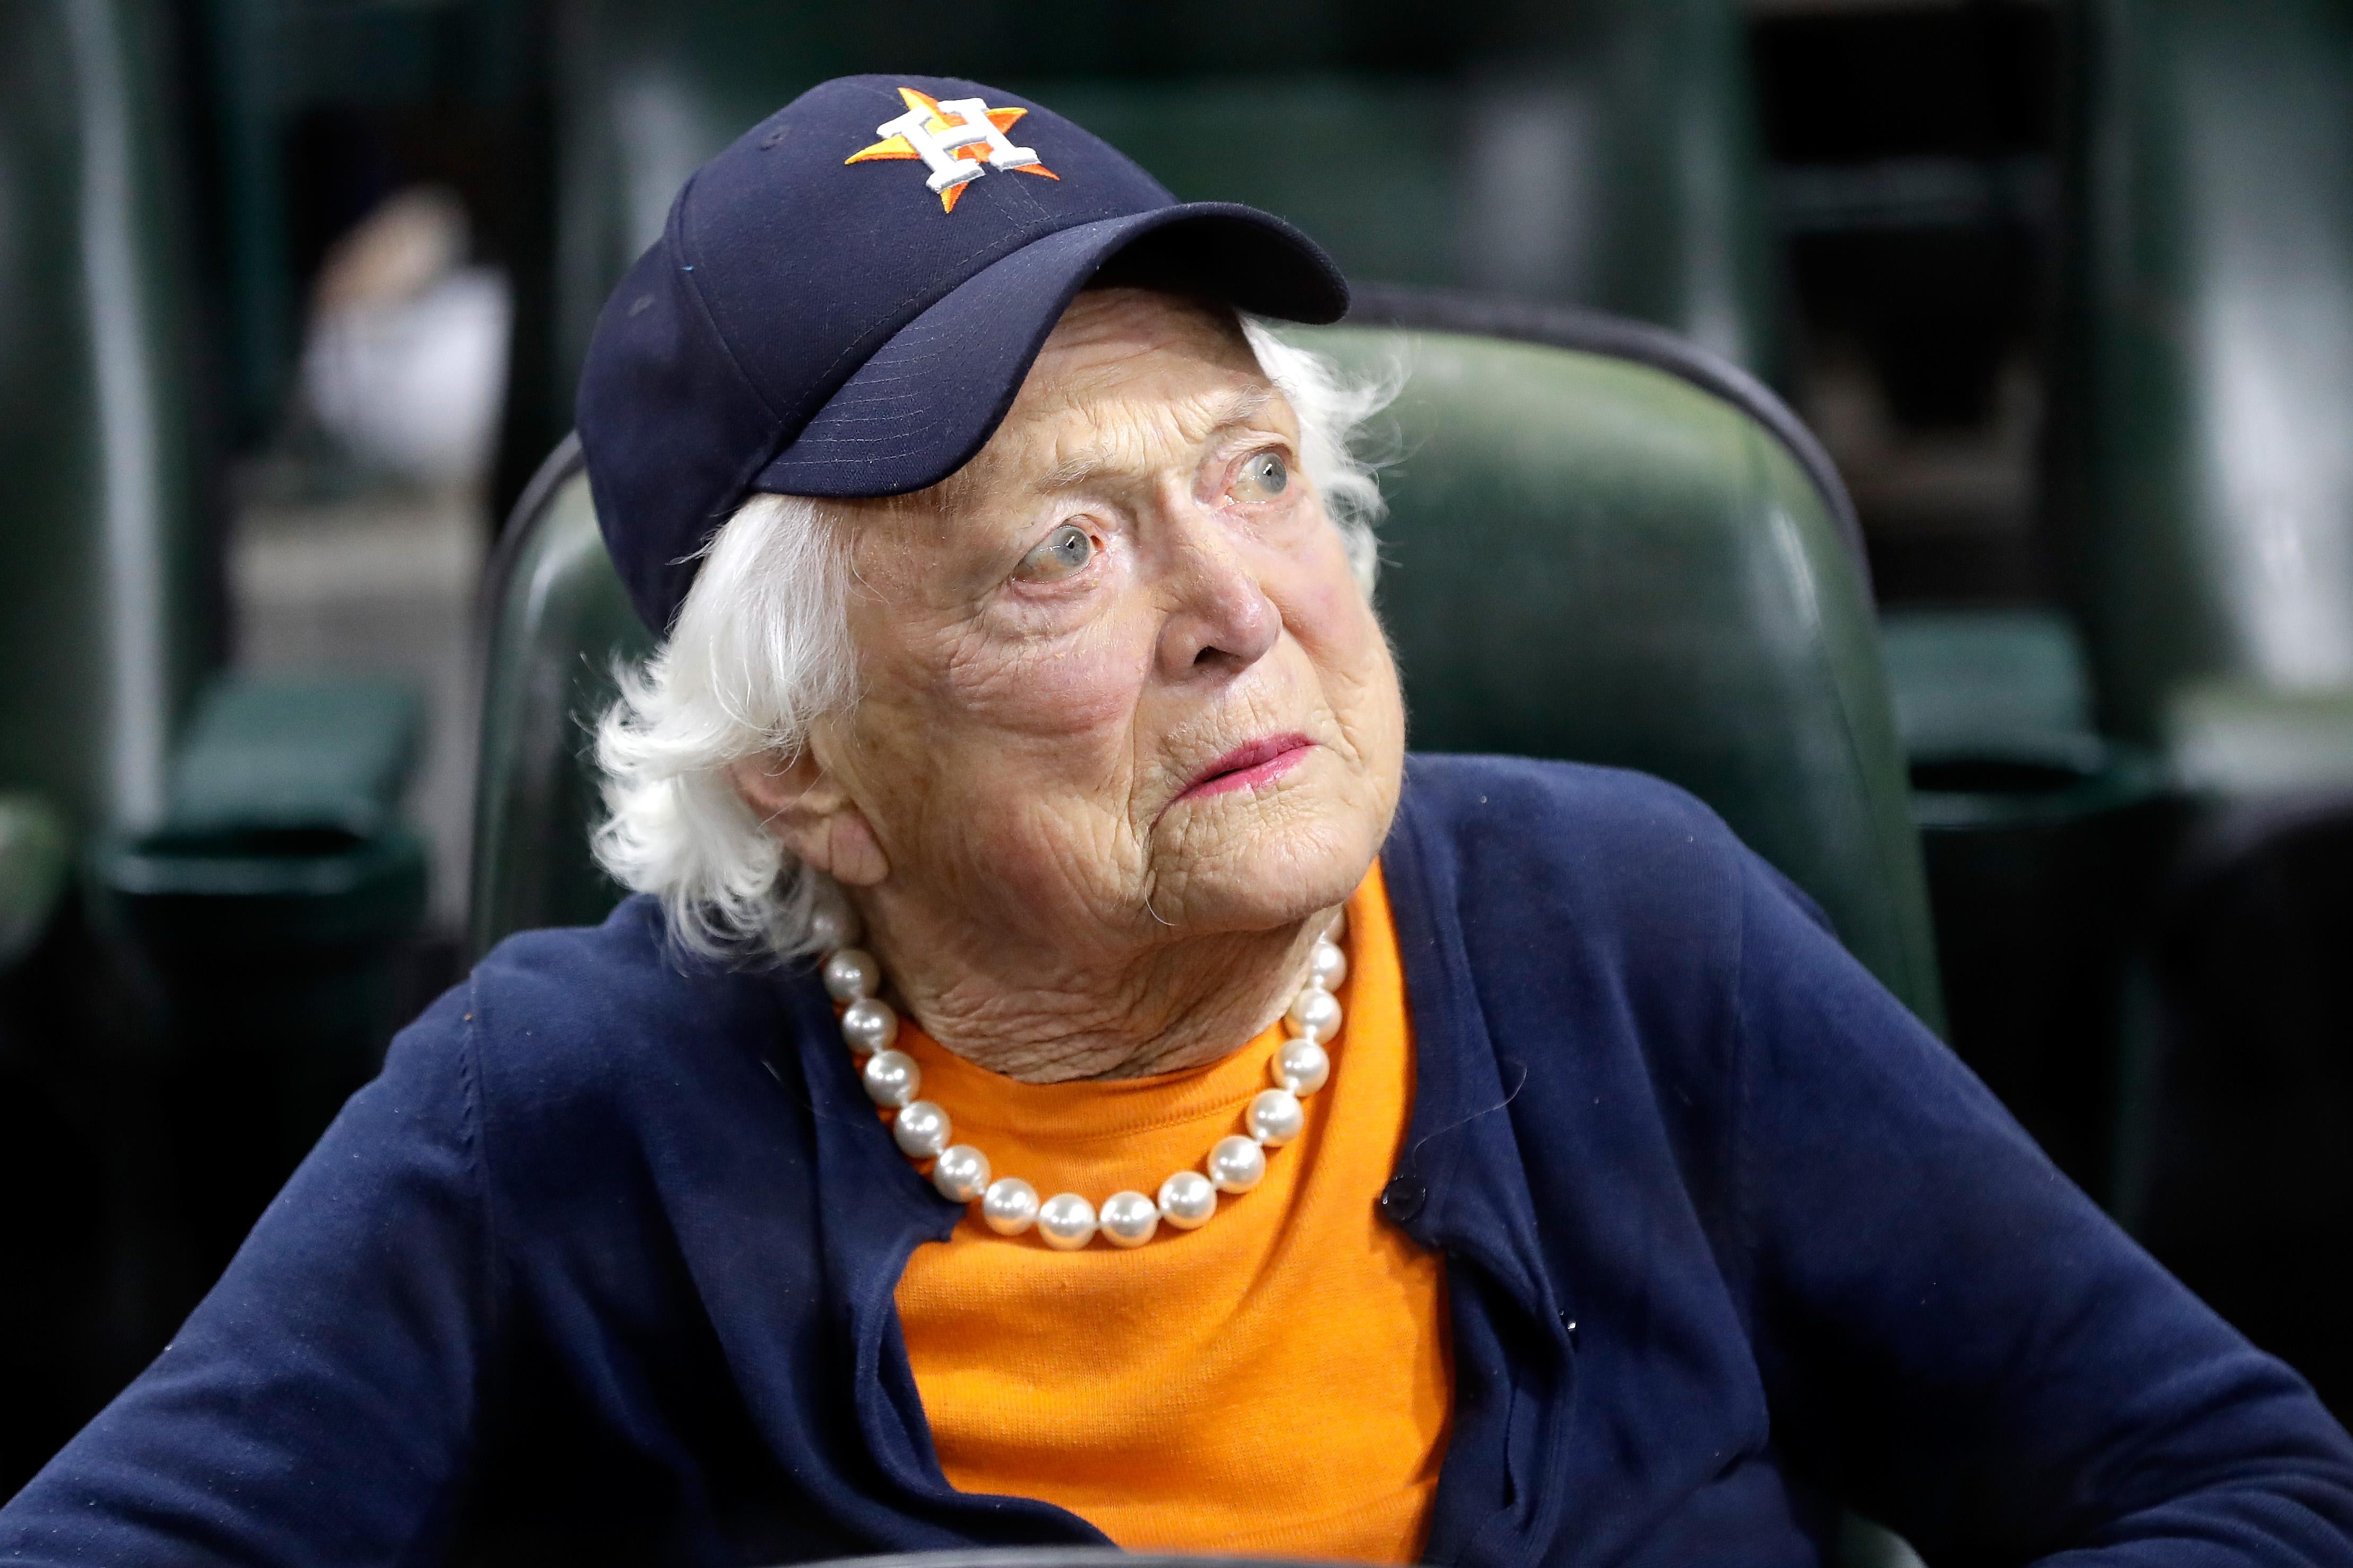  Former first lady Barbara Bush looks on during the 2017 World Series between the Houston Astros and the Los Angeles Dodgers on Oct. 29, 2017 in Houston, Texas. 